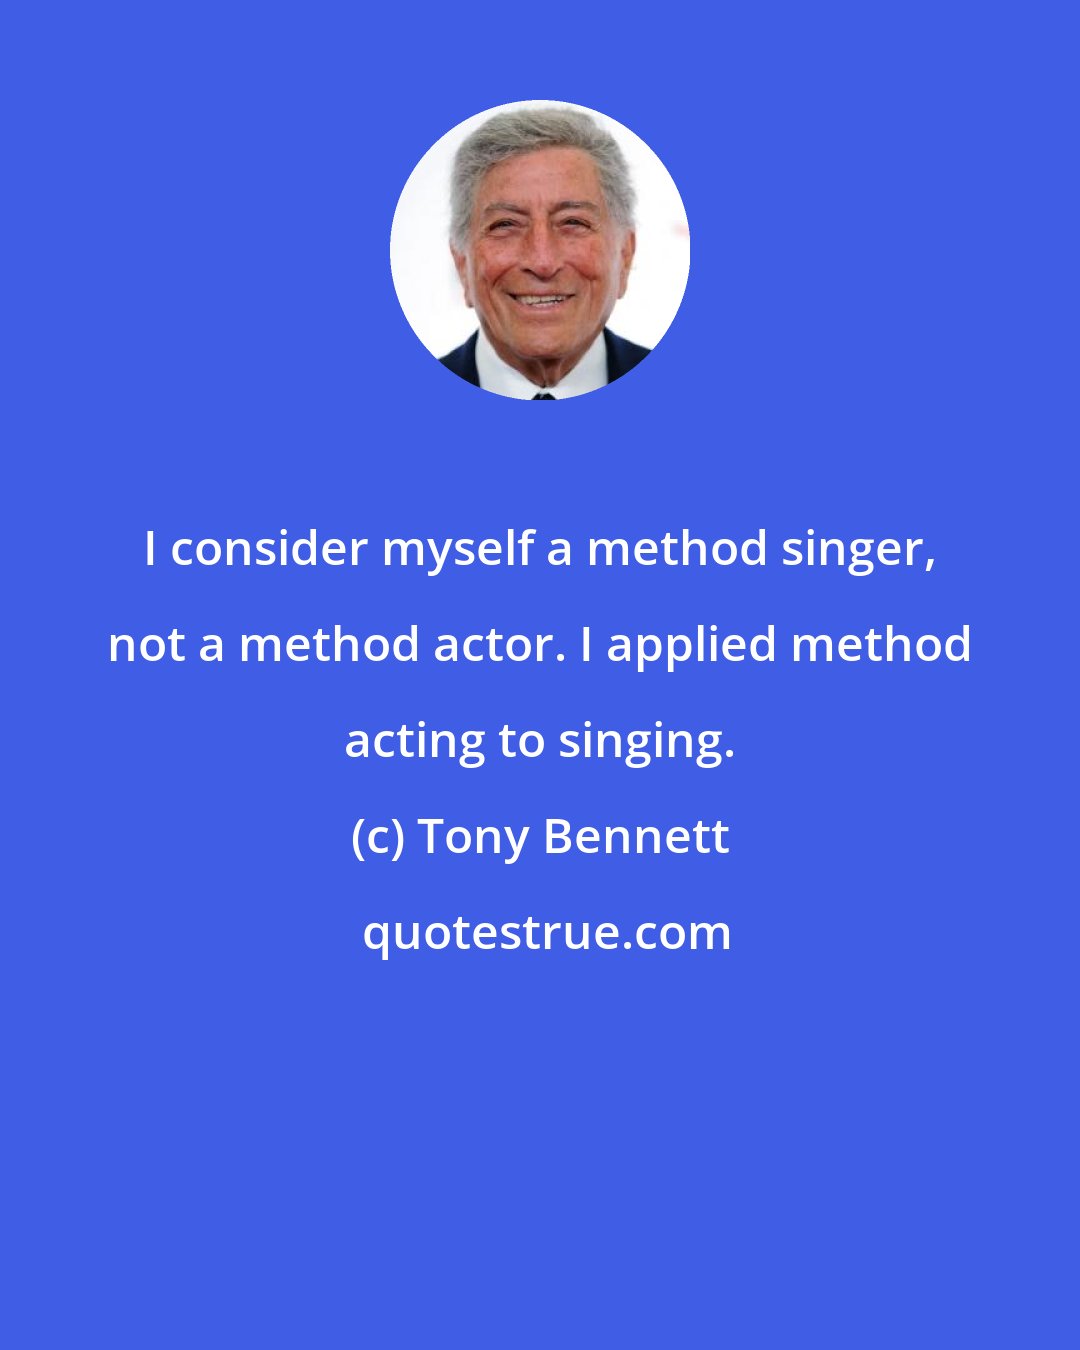 Tony Bennett: I consider myself a method singer, not a method actor. I applied method acting to singing.